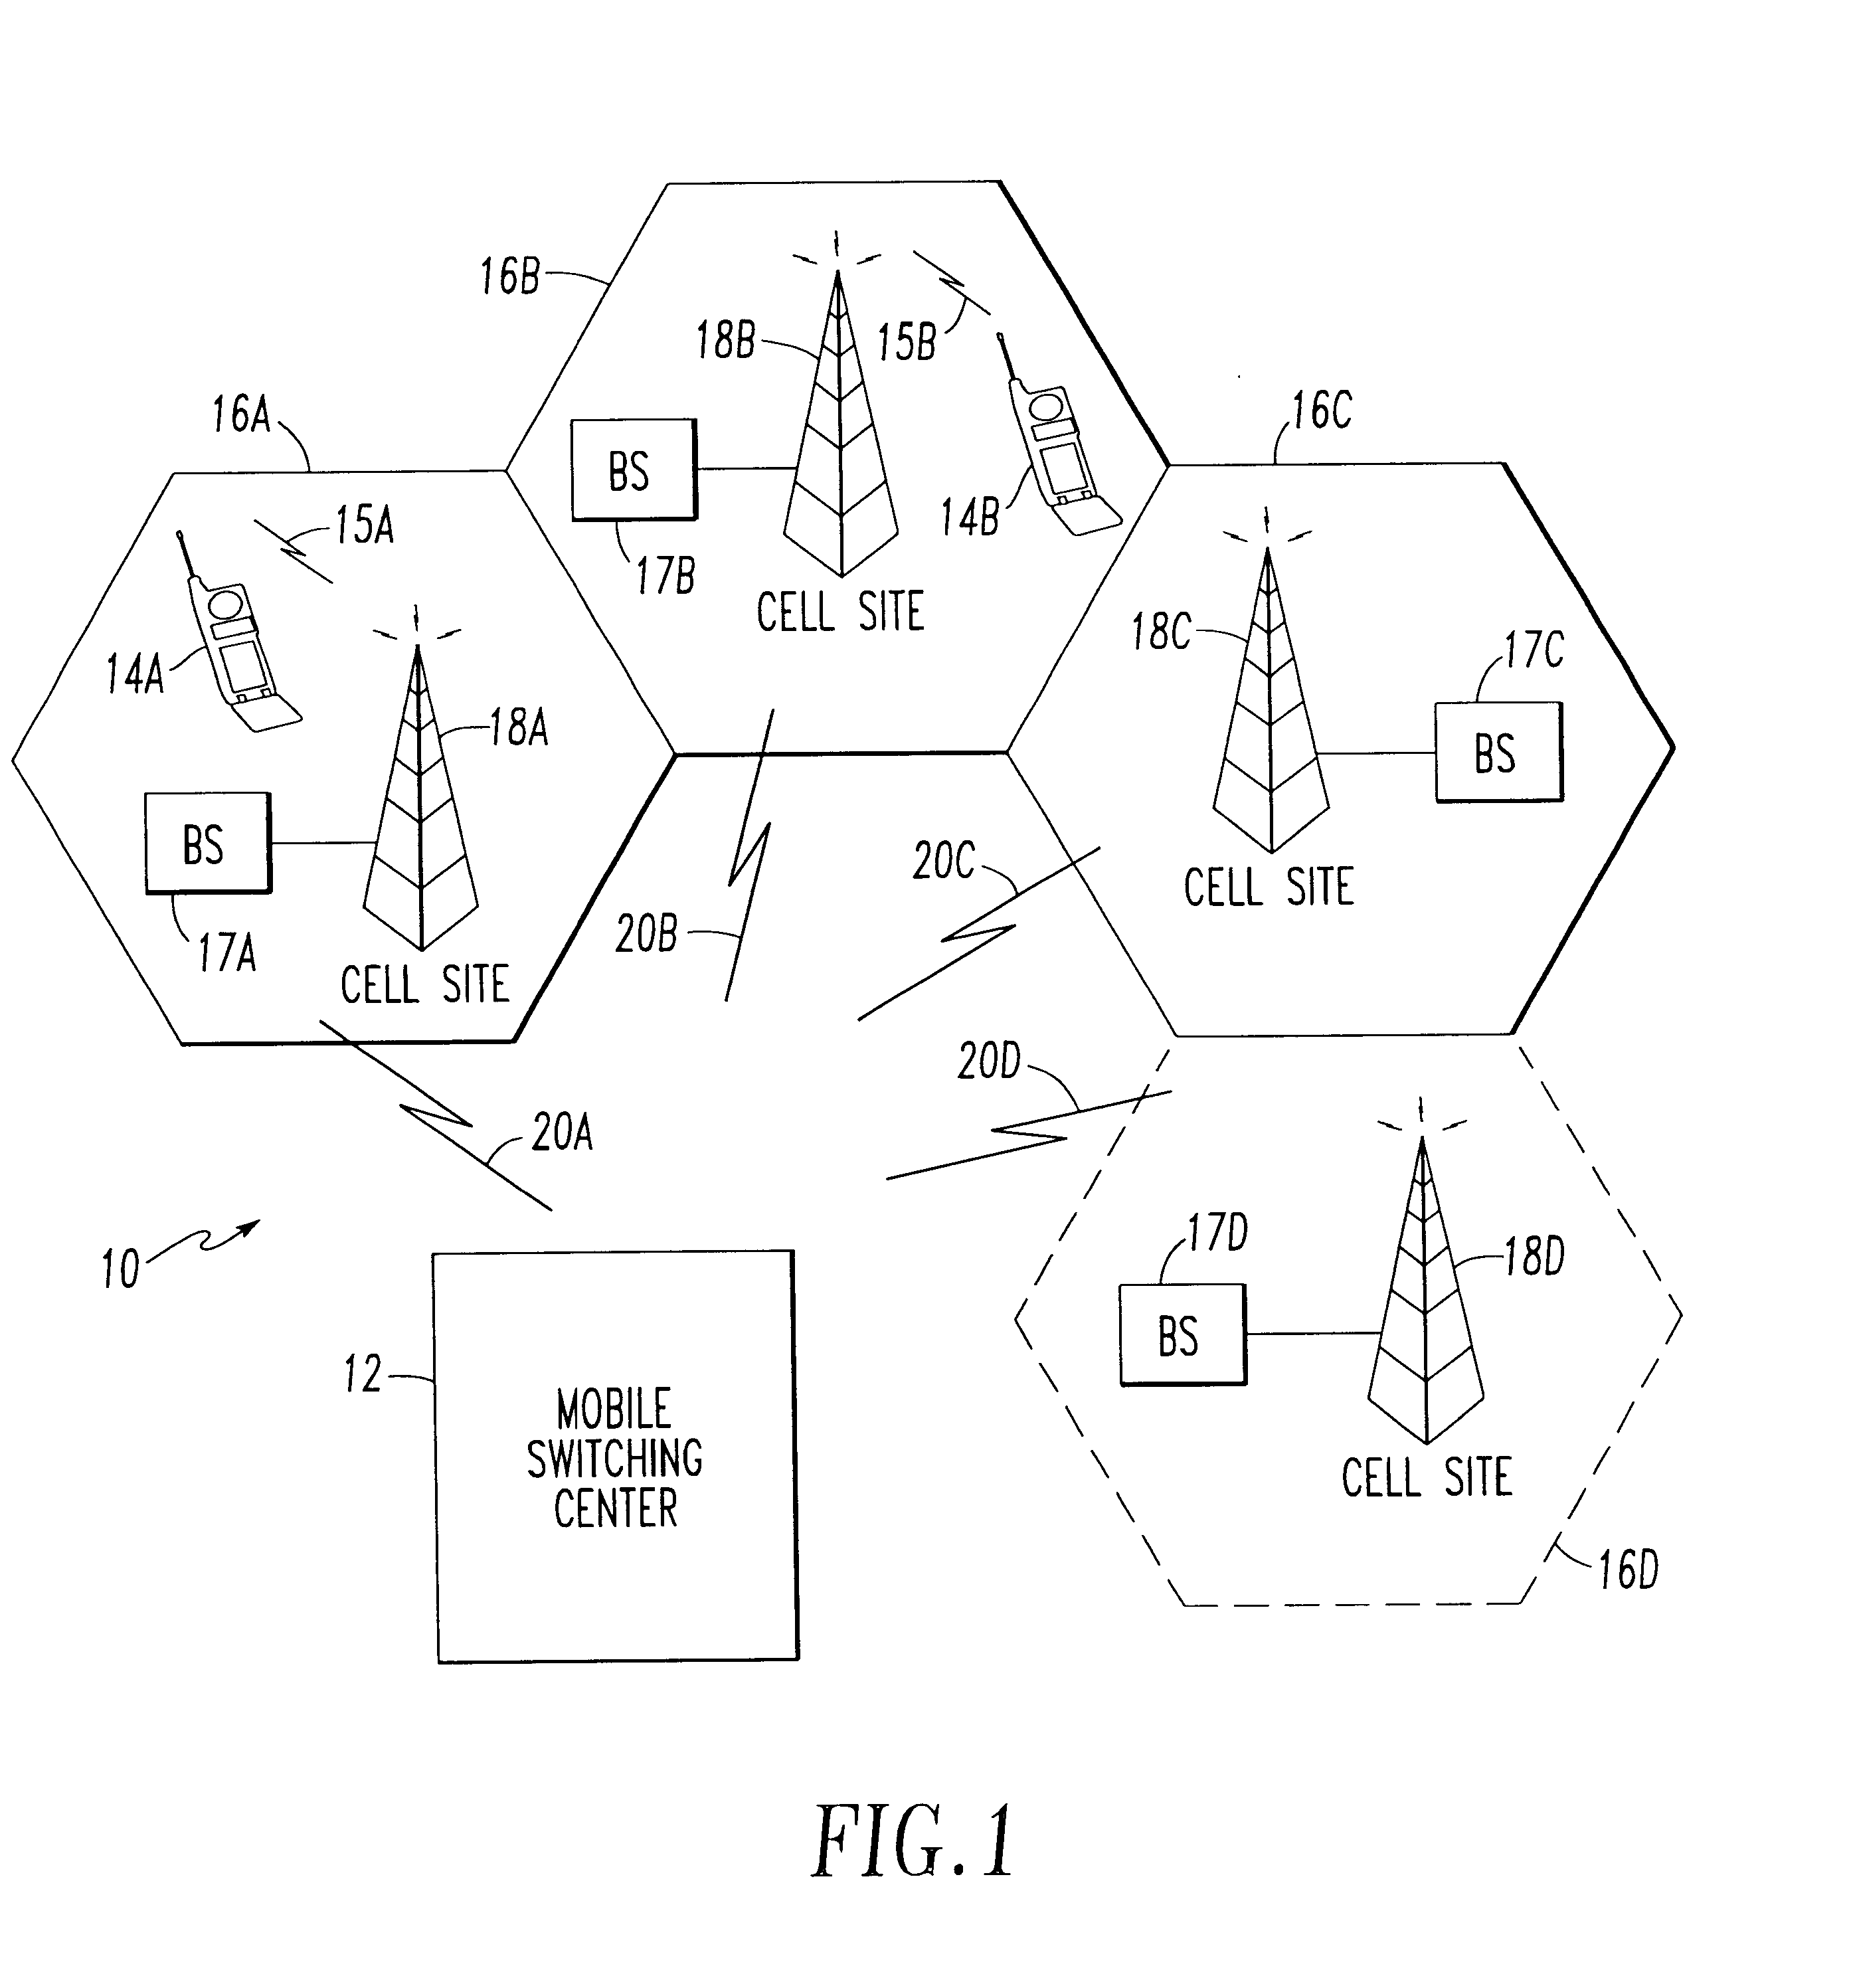 Method for automated retune of telecommunications data in a wireless network using ericsson equipment